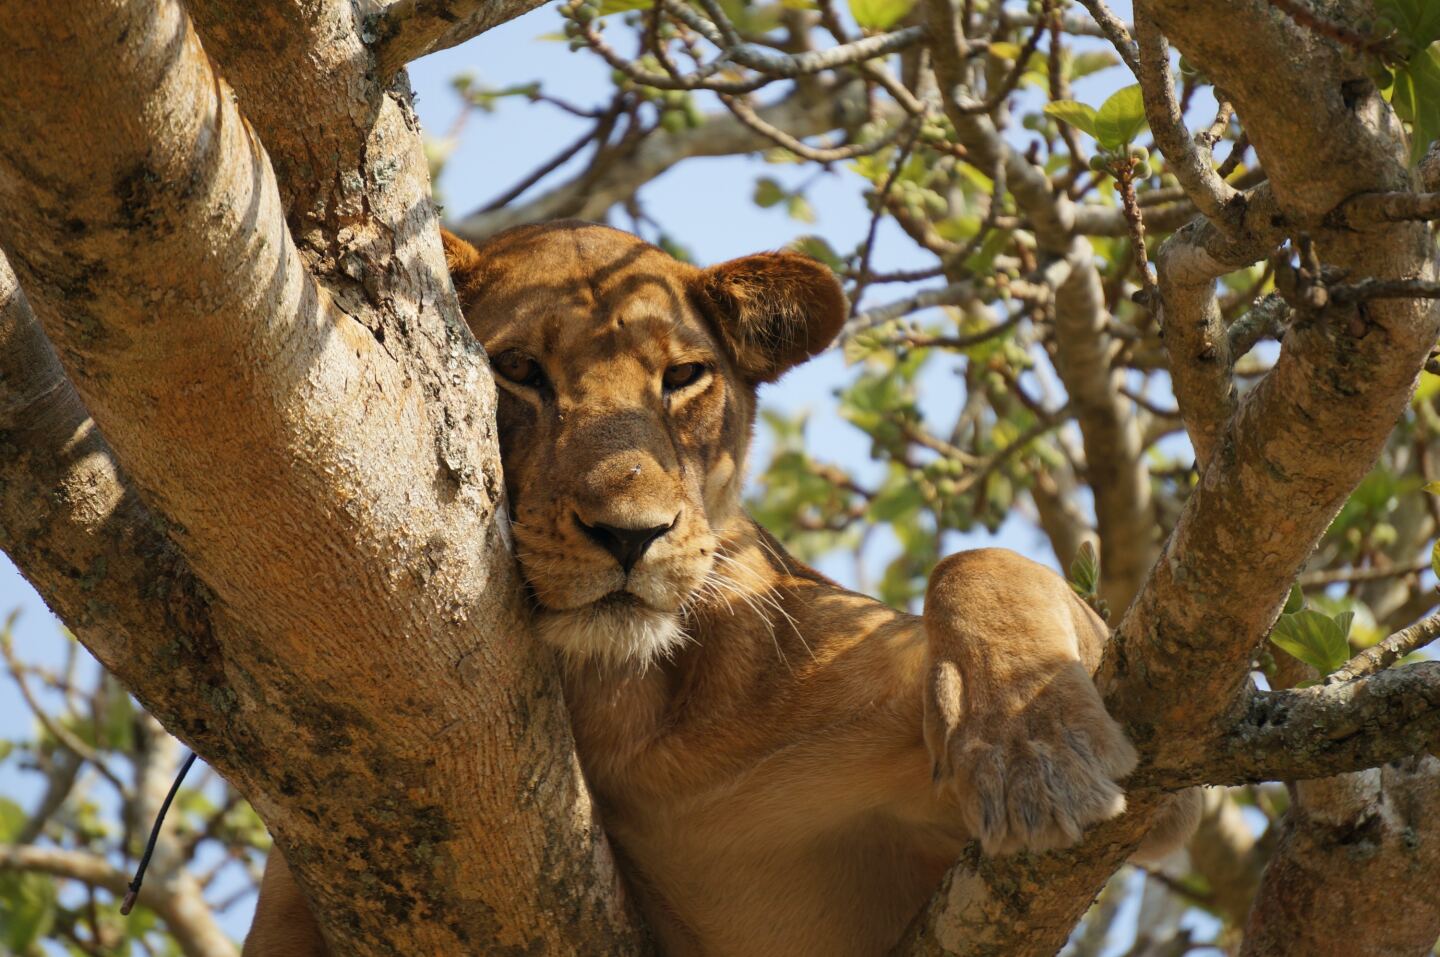 <h2>Queen Elizabeth National Park</h2> <ul>   <li><b>Go for</b>: Wildlife, including tree-climbing lions, and scenic landscapes</li>   <li><b>Location</b>: <a class="Link" href="https://maps.app.goo.gl/uouAJCTsKyjagJWs6" rel="noopener">Google Maps</a></li>  </ul> <p>From the Rwenzori Mountains, it’s a two-hour drive to Uganda’s second-largest national park, which is also the country’s most popular. Queen Elizabeth National Park is famously home to tree-climbing lions, along with nearly 100 species of mammals. It’s also one of the most important birding destinations in Uganda, with more than 600 species, such as the shoebill stork, Pel’s fishing owl, and grey crowned crane, which is the country’s national bird.<br>A boat cruise along the Kazinga Channel, a 20-mile long natural channel that connects Lake George and Lake Edward, may reward visitors with sightings of Nile crocodiles, hippos, elephants, and much more. Beyond the wildlife, travelers can experience a wide range of natural landscapes in Queen Elizabeth National Park, from forests and grasslands to swamplands and volcanic craters.</p>